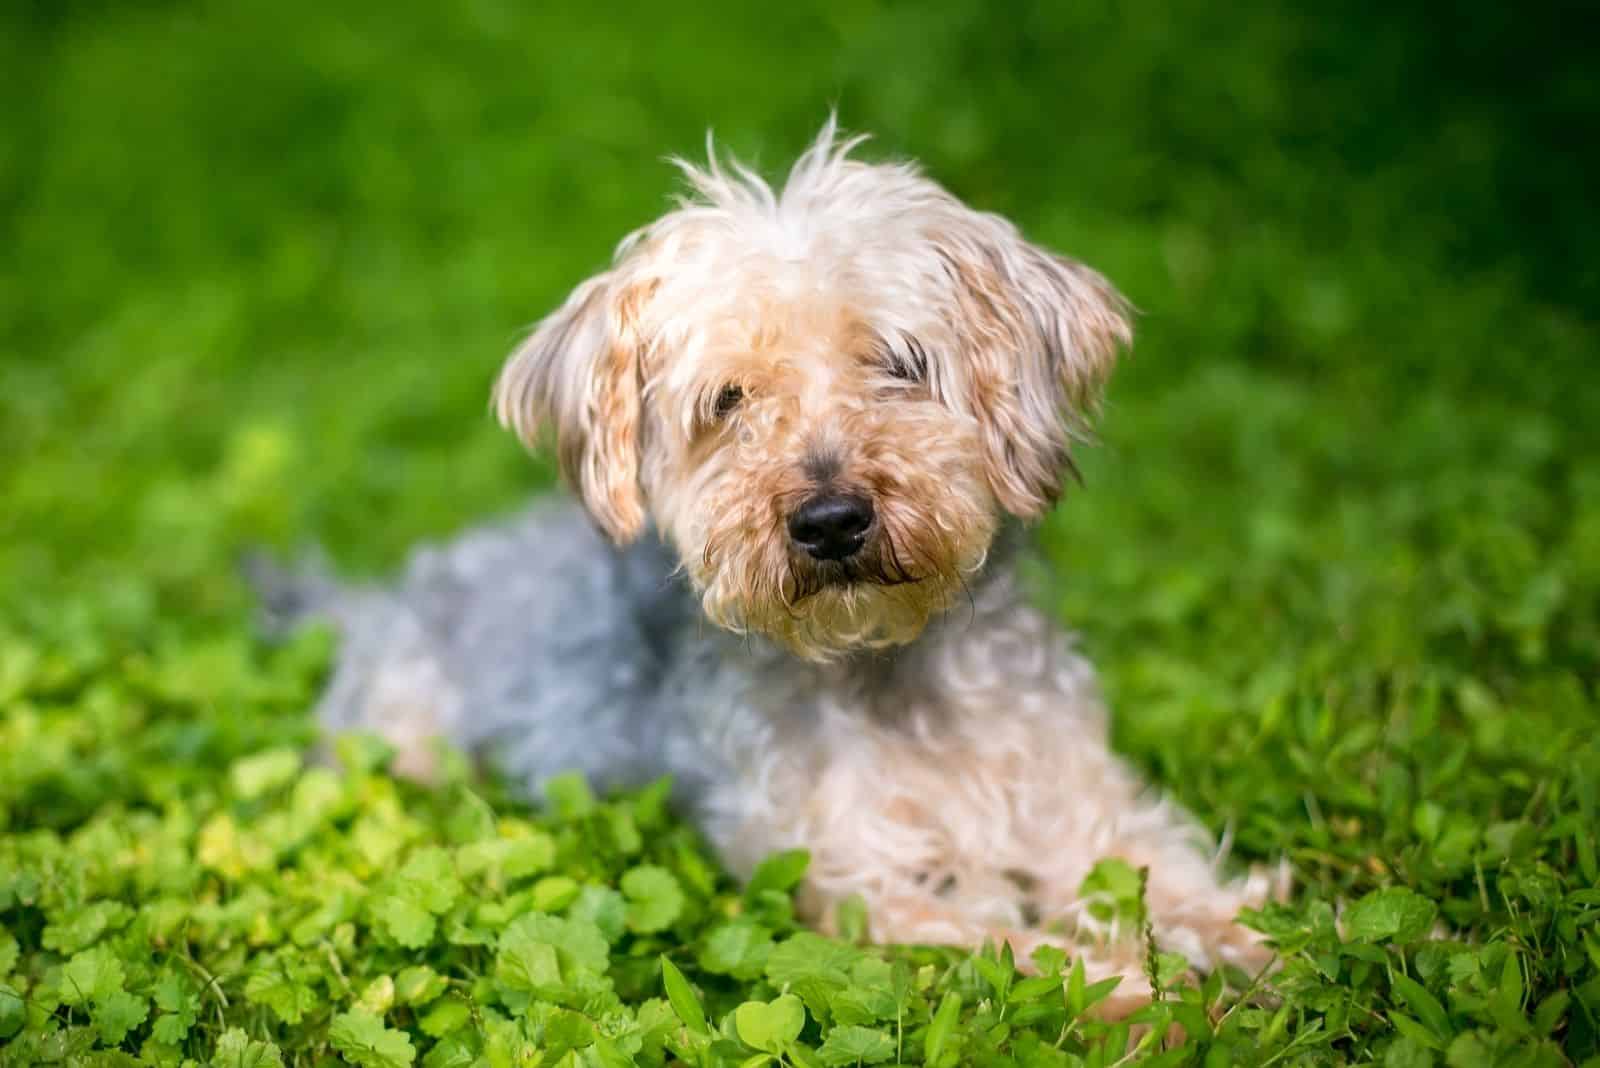 Yorkshire Terrier x Poodle mixed breed dog lying down in the grass